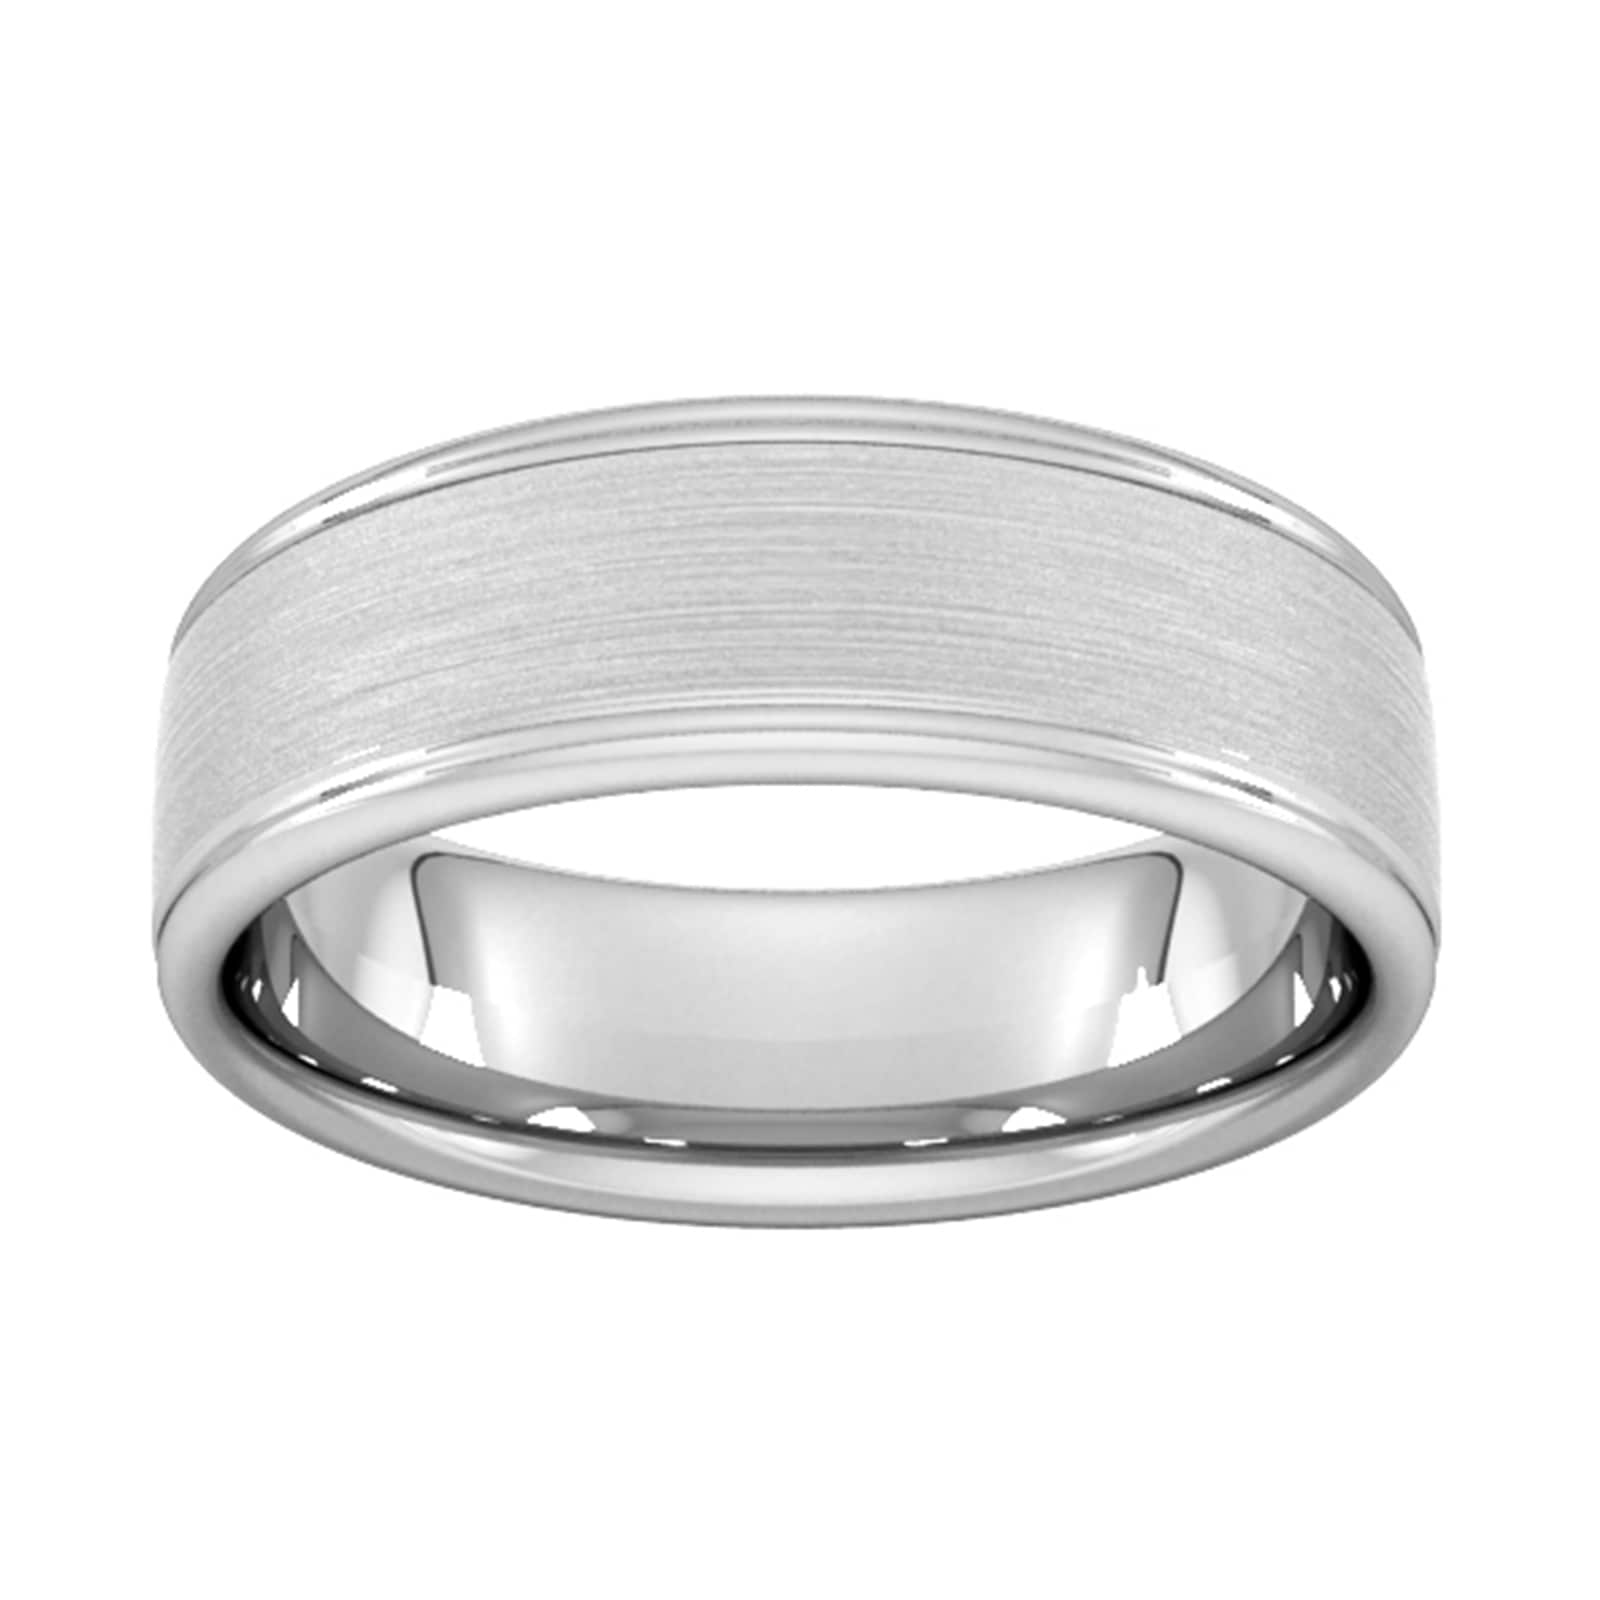 7mm Slight Court Extra Heavy Matt Centre With Grooves Wedding Ring In 9 Carat White Gold - Ring Size J